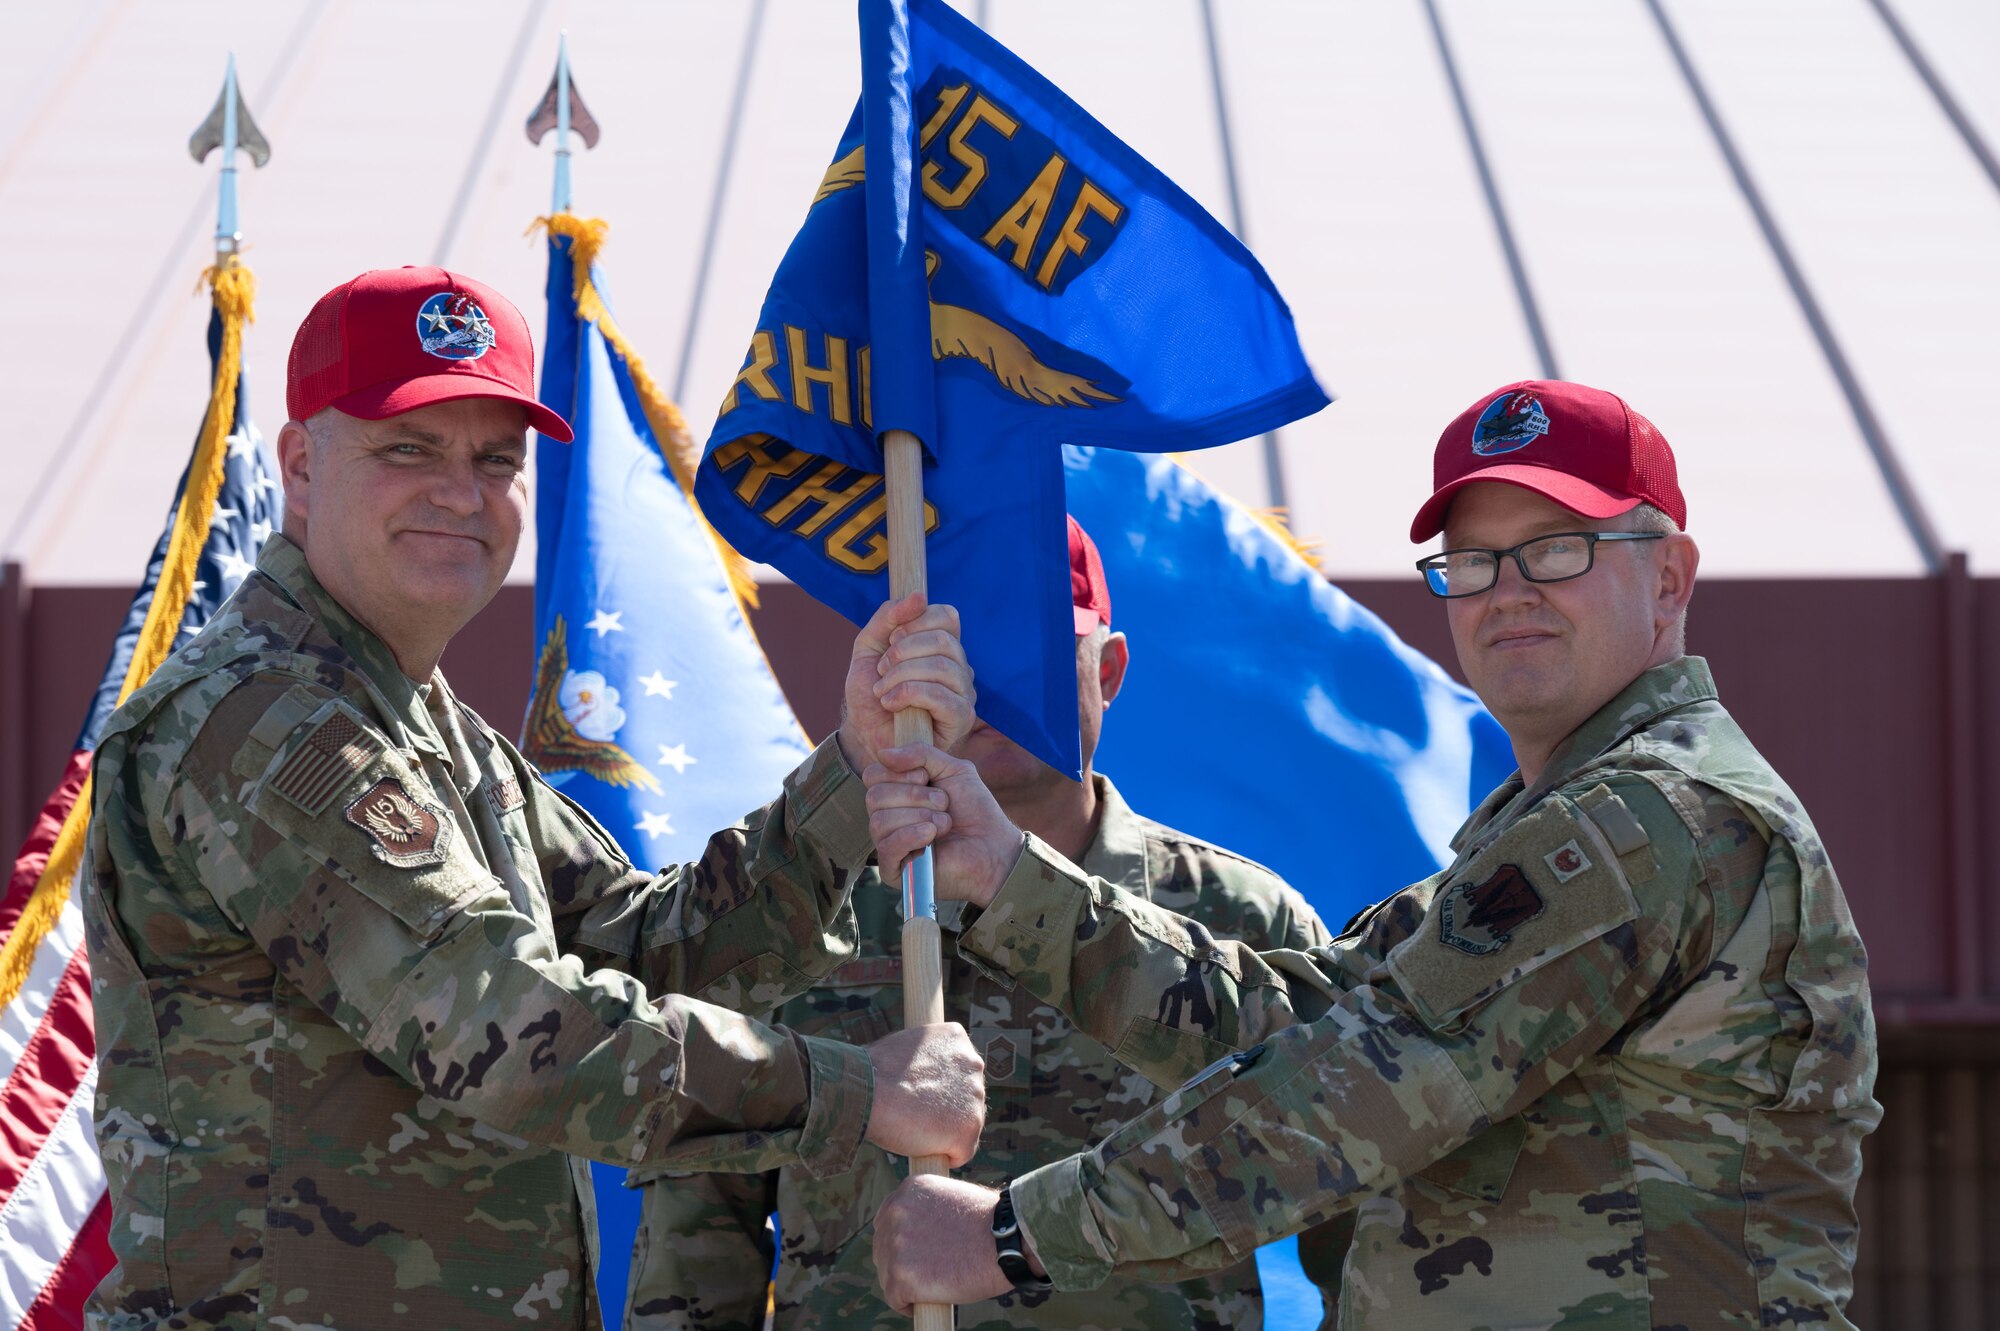 U.S. Air Force Maj. Gen. Michael Koscheski, left, 15th Air Force commander, passes the 800th Rapid Engineering Deployable Heavy Operations Repair Squadron Engineer Group (RED HORSE) Group (RHG) guidon to Col. Andrew Cullen, during a change of command ceremony on Nellis Air Force Base, Nevada, May 16, 2023.